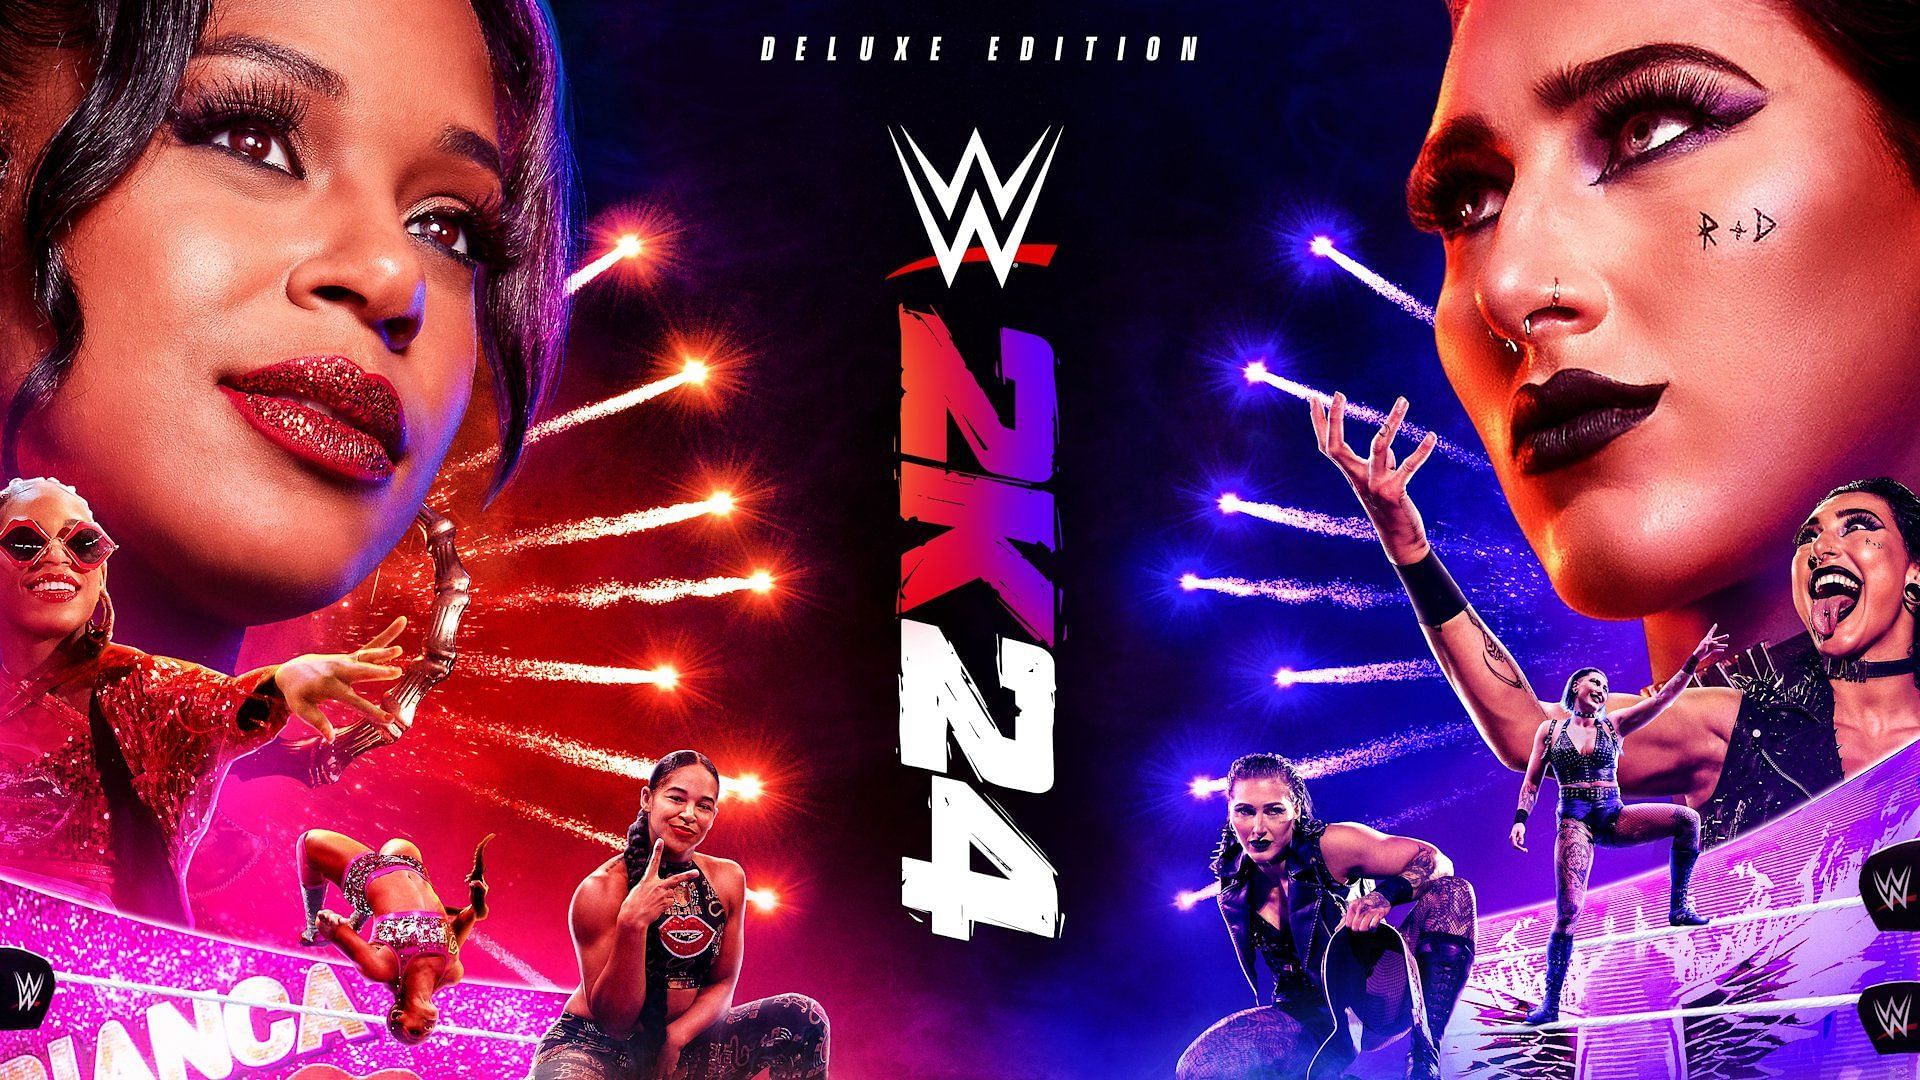 Bianca Belair and Rhea Ripley on the cover of the WWE 2K24 deluxe edition